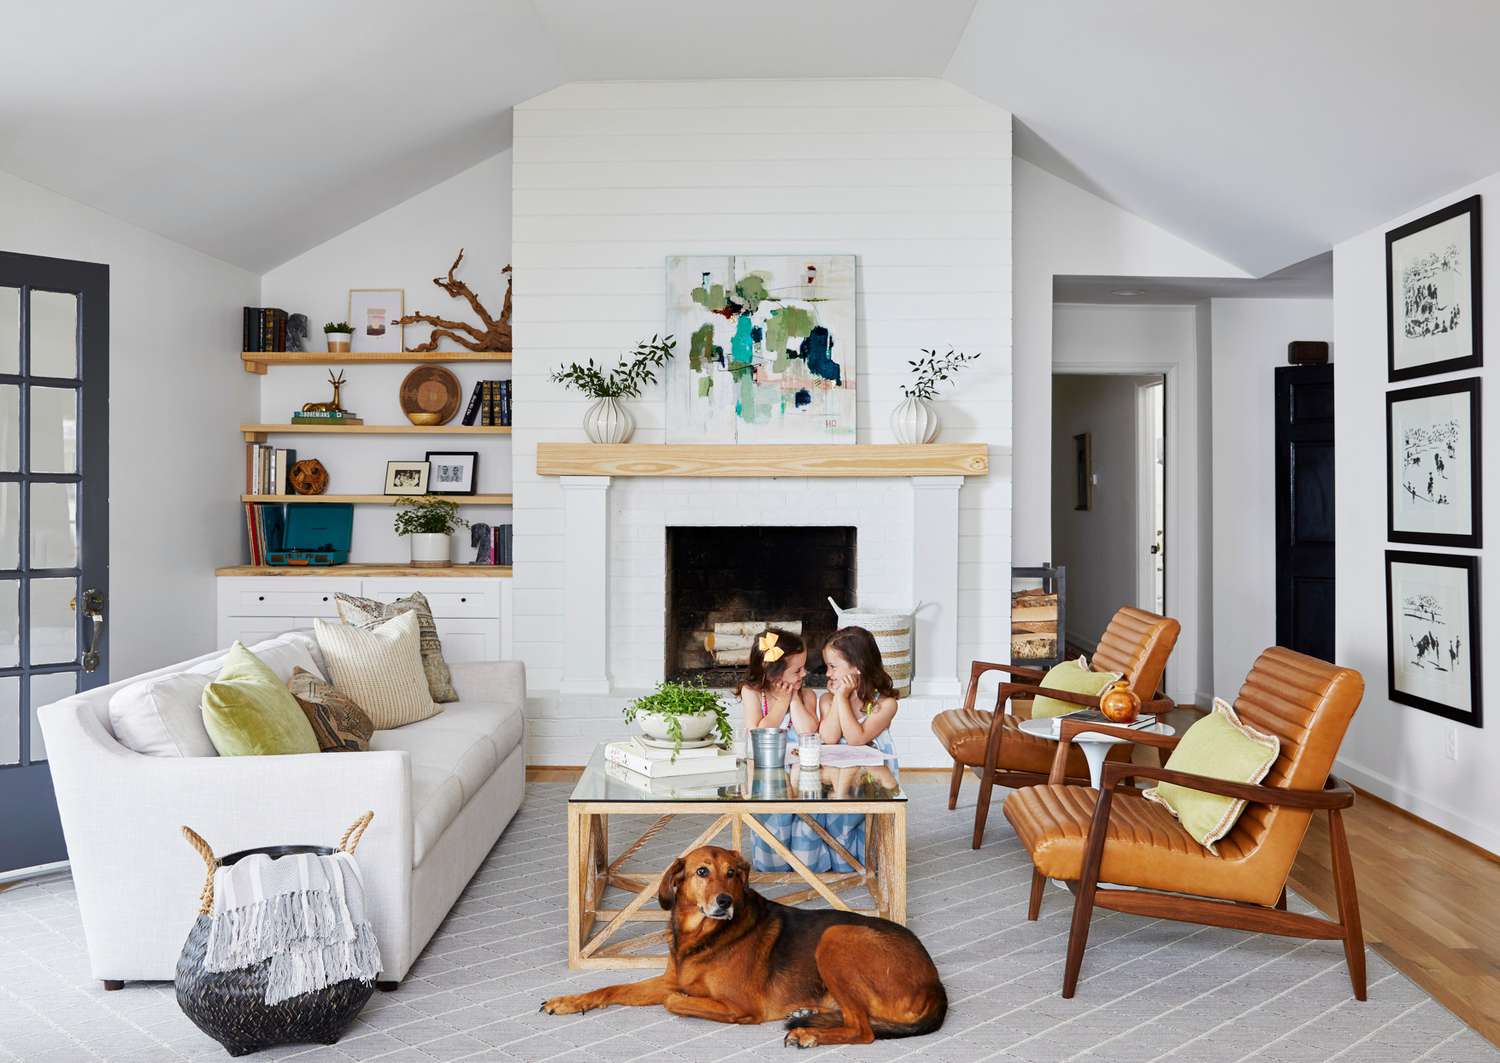 a-frame ceiling living room with dog and daughters